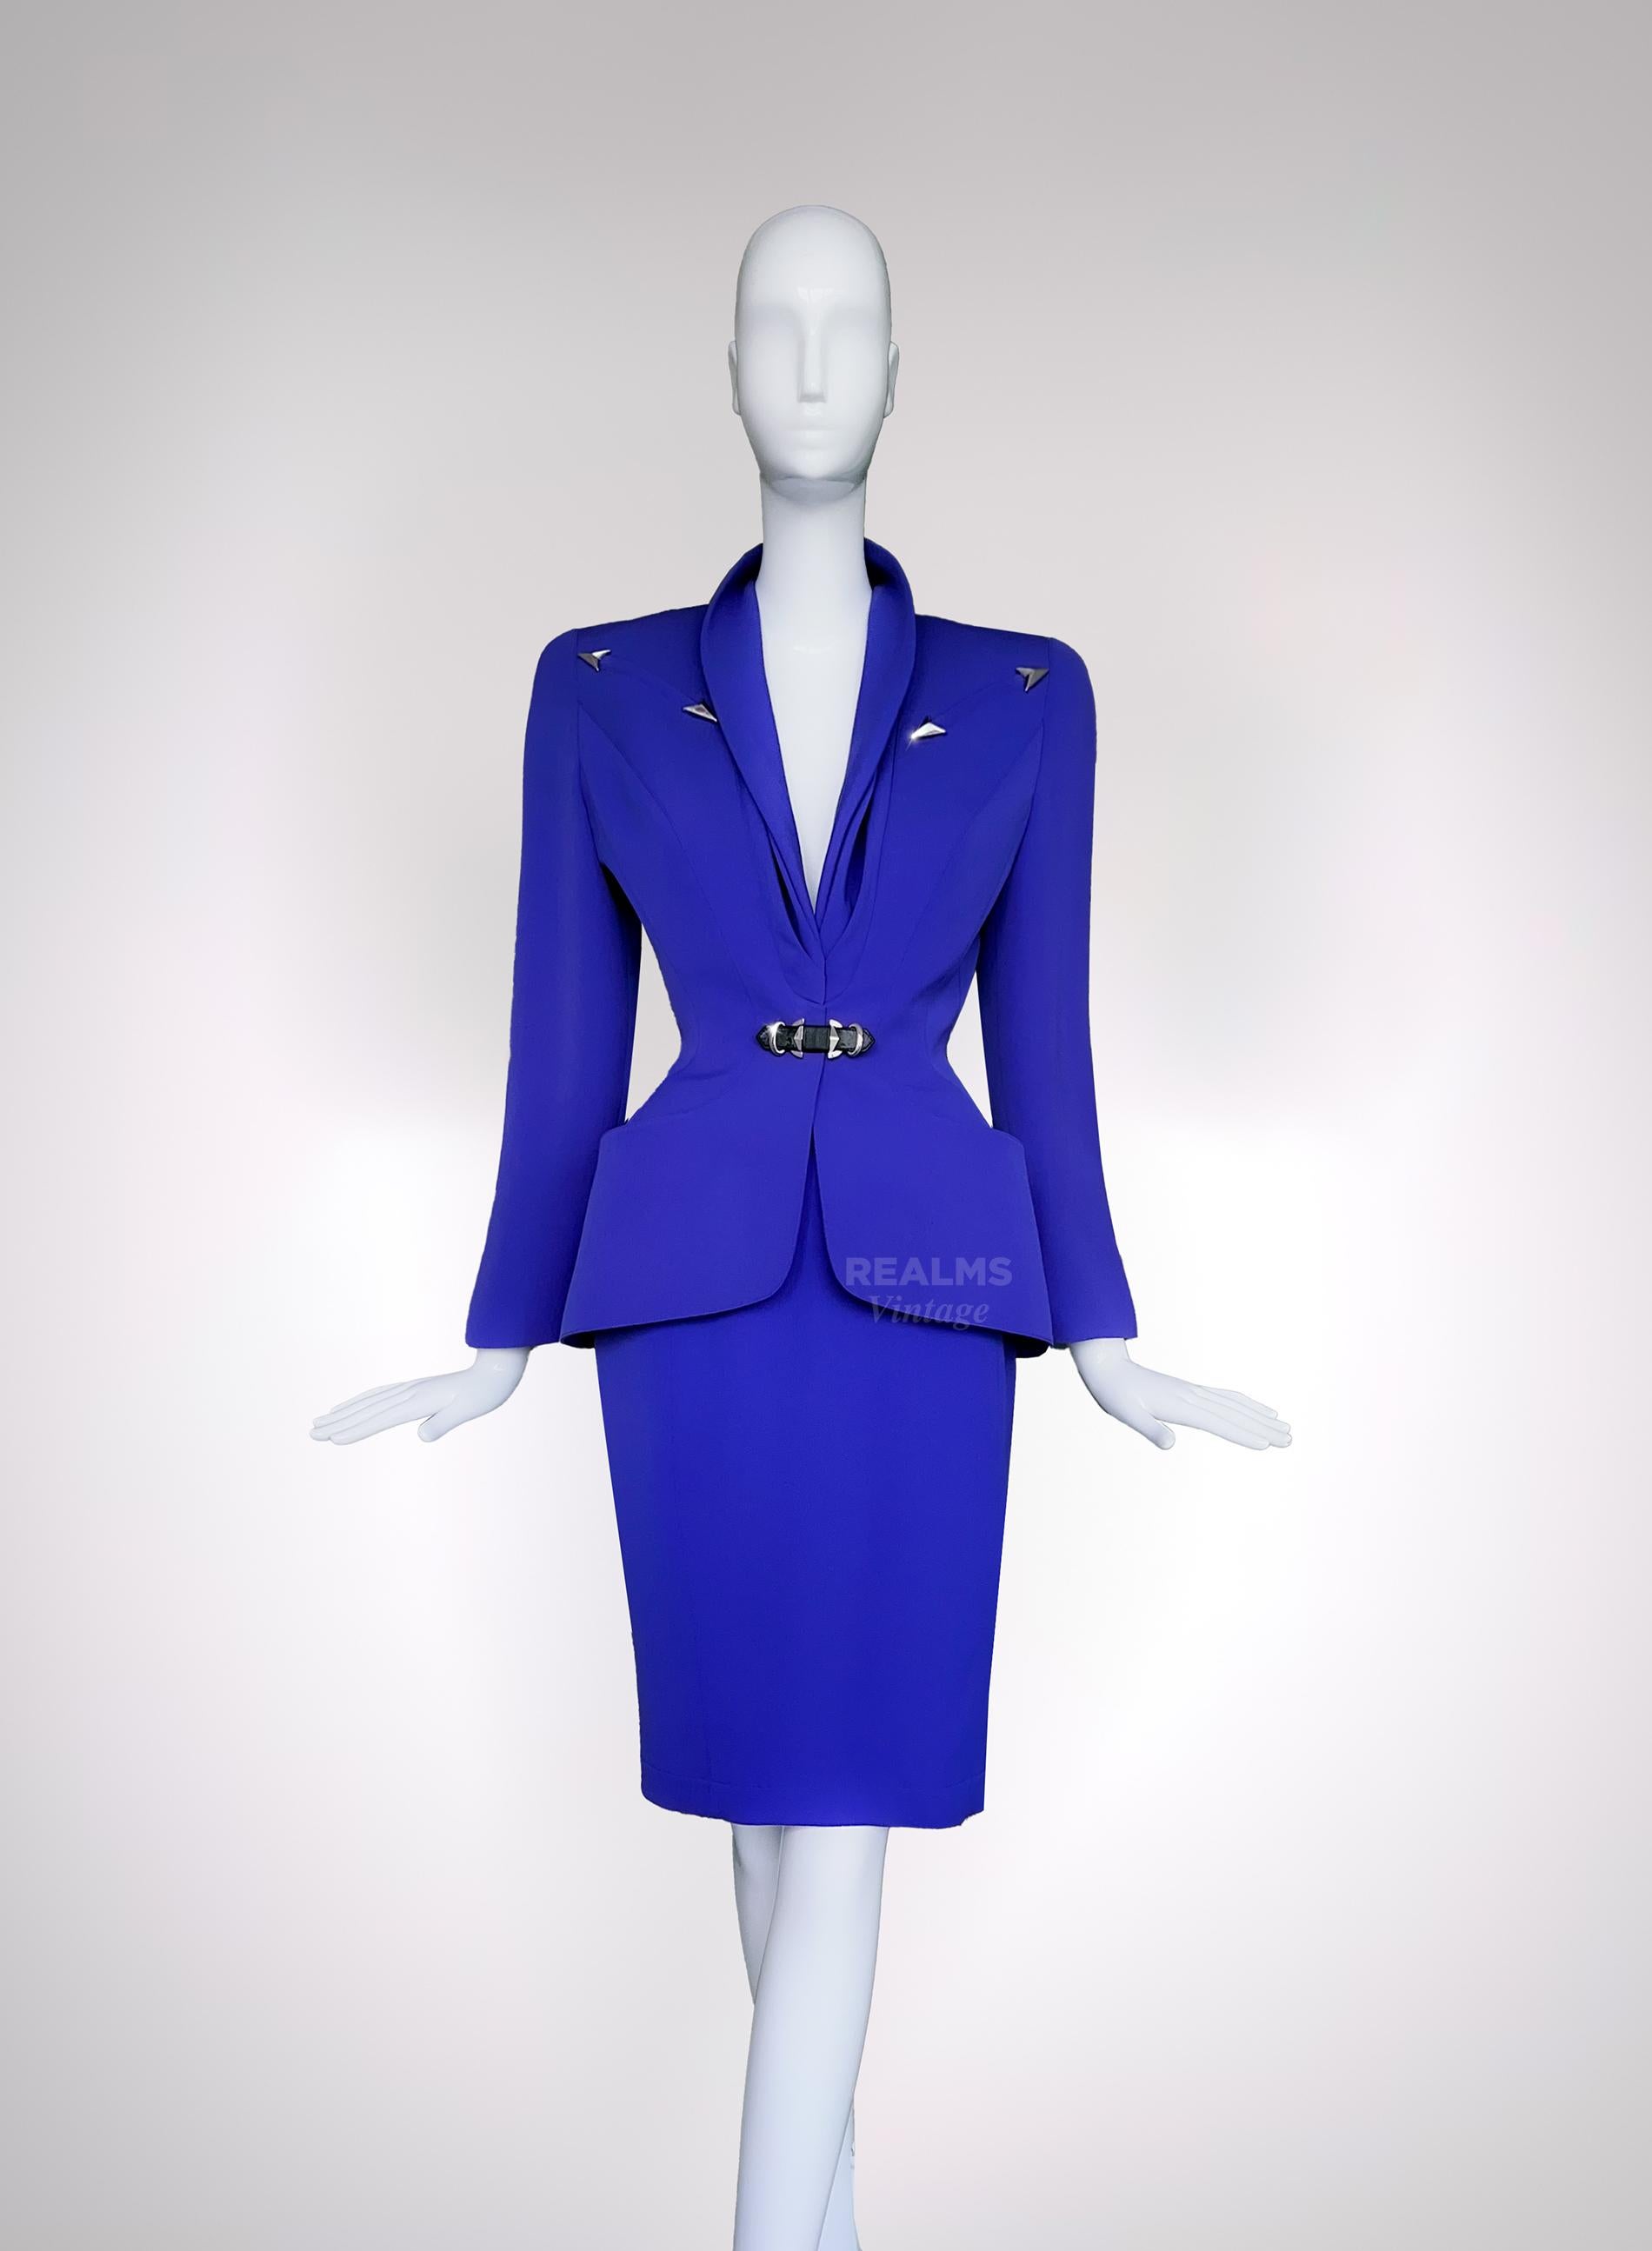 Thierry Mugler Archival FW 1996 Skirt Suit Blue Metal Arrows Jacket Skirt For Sale 9